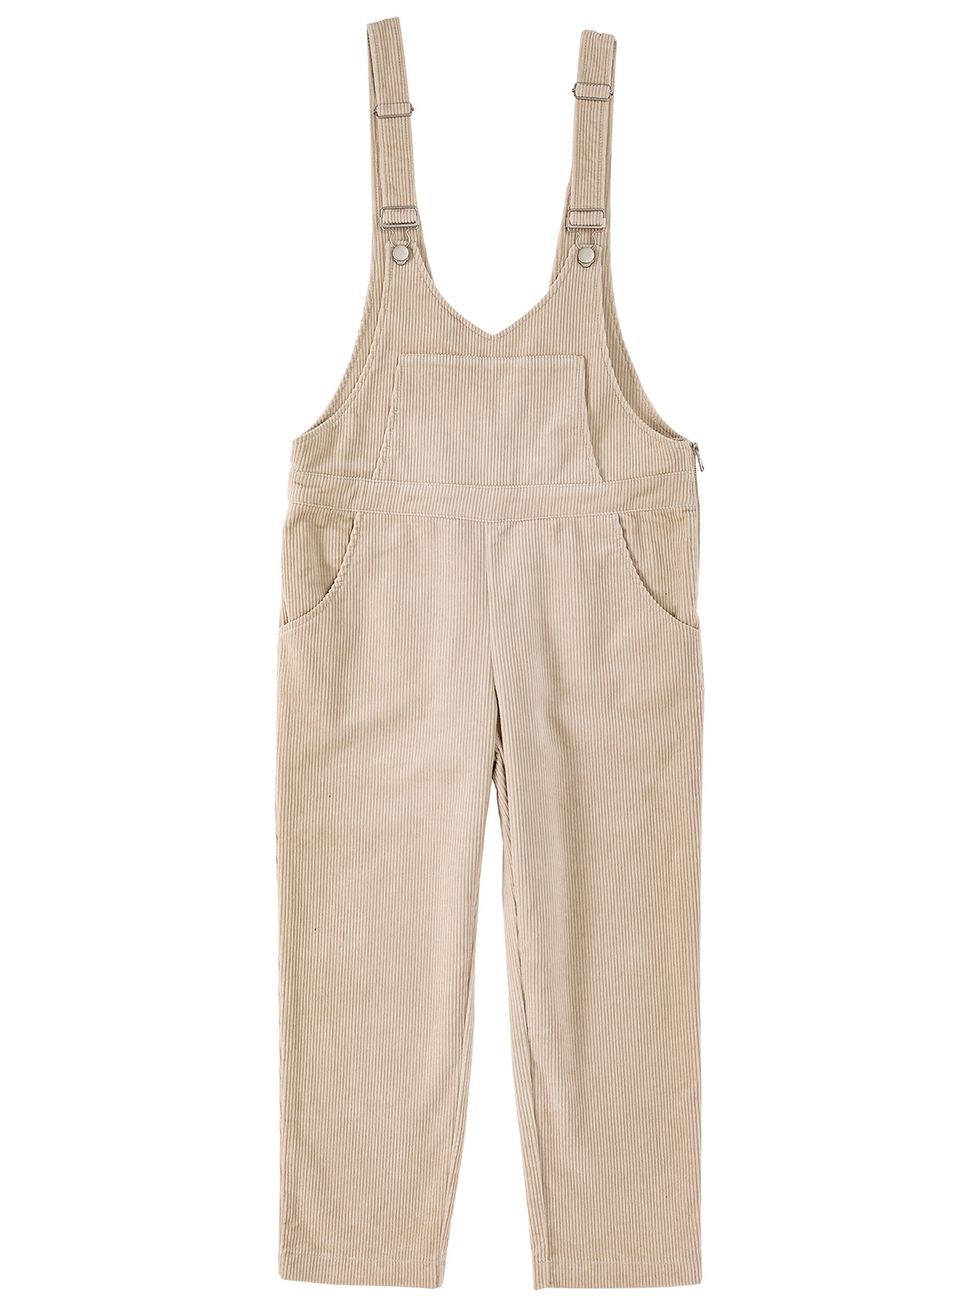 Clothing, Overall, One-piece garment, Beige, Sportswear, Trousers, camisoles, 